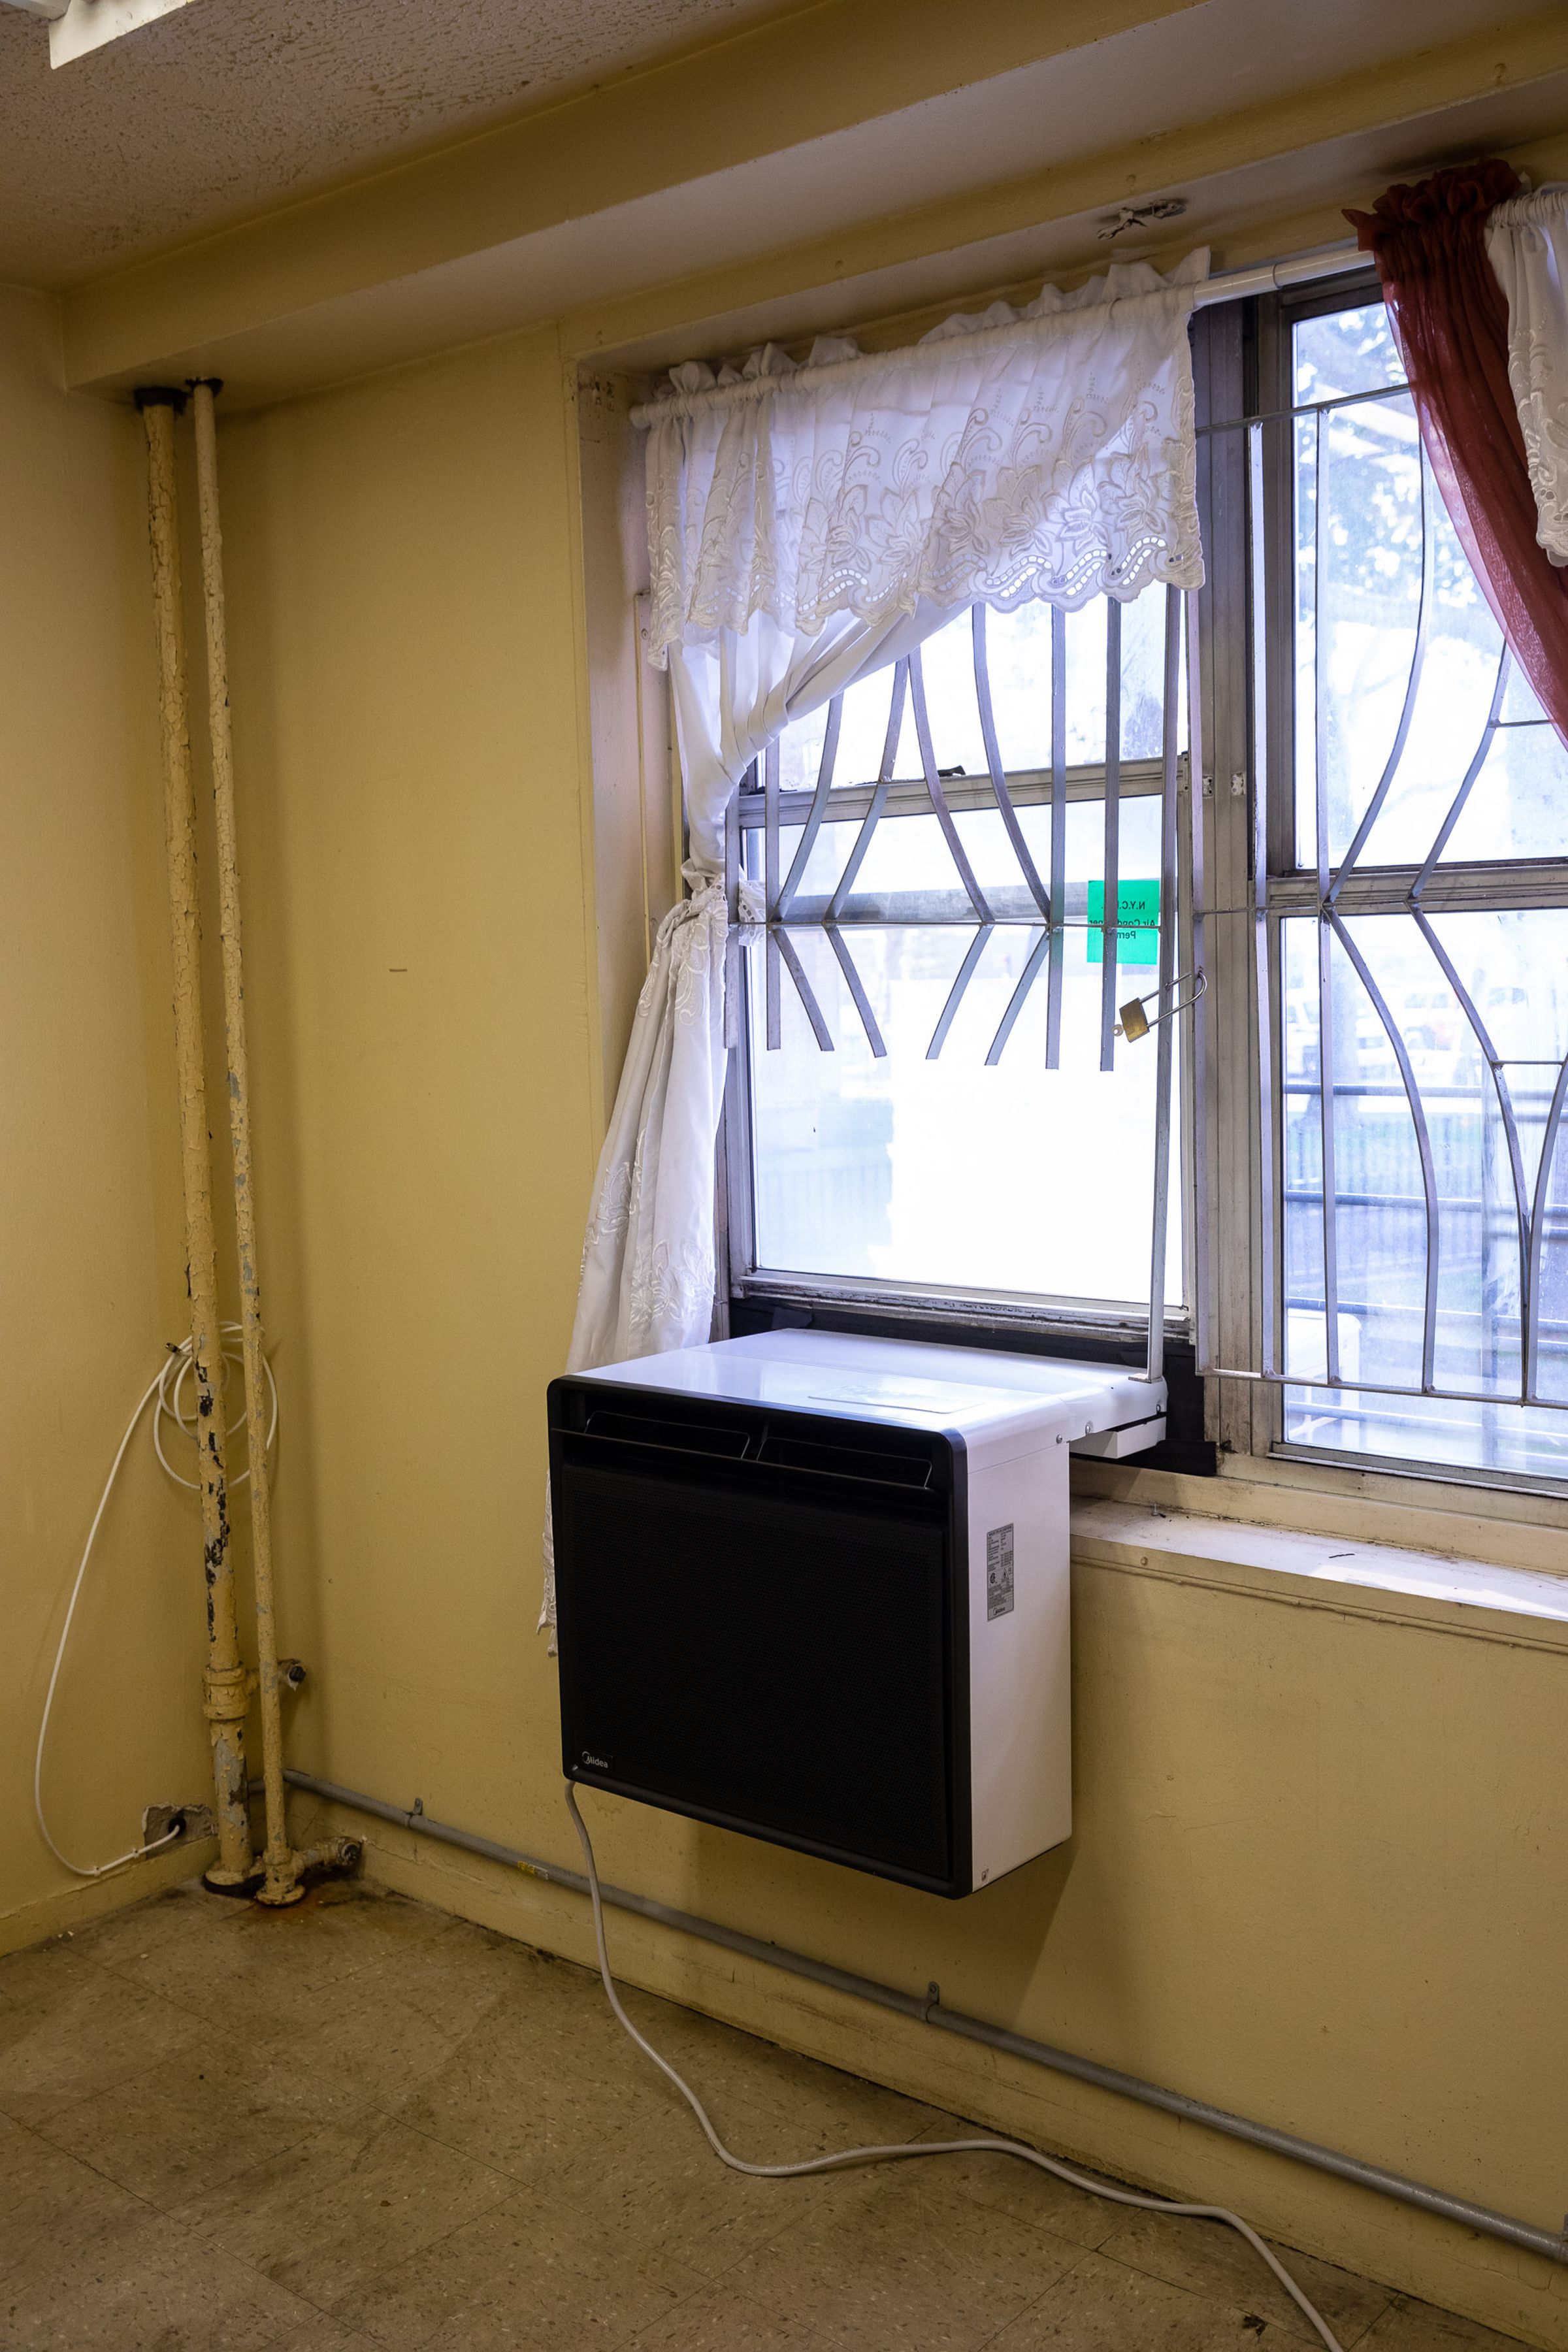 A rectangular heat pump sits in a window sill with off-white lace curtains tucked behind it.